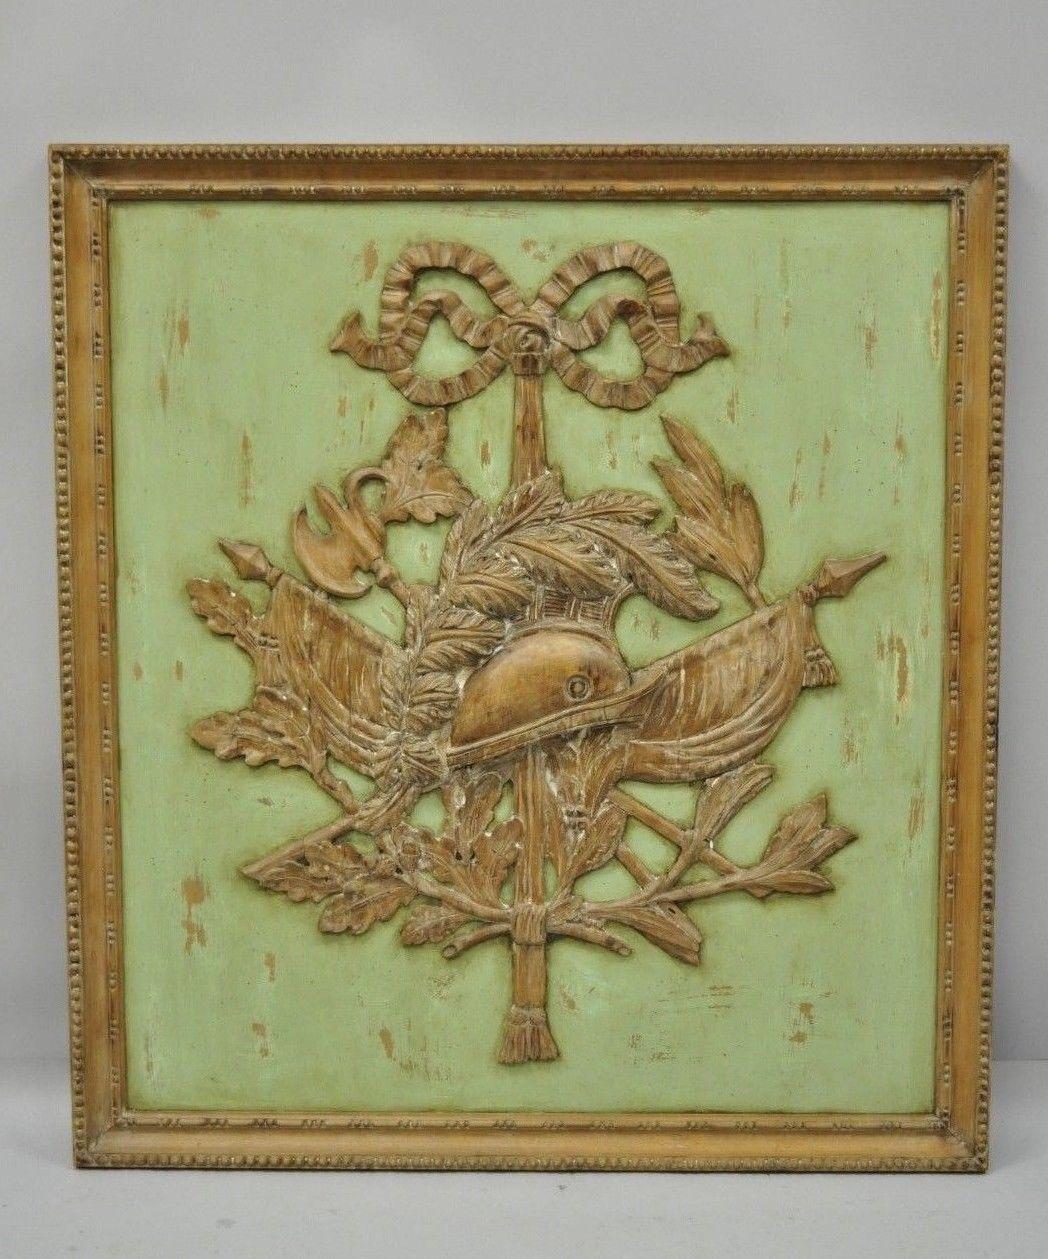 Italian Regency Hand-Carved Wood Coat of Arms Green Wall Plaque Art Frame Panel 8